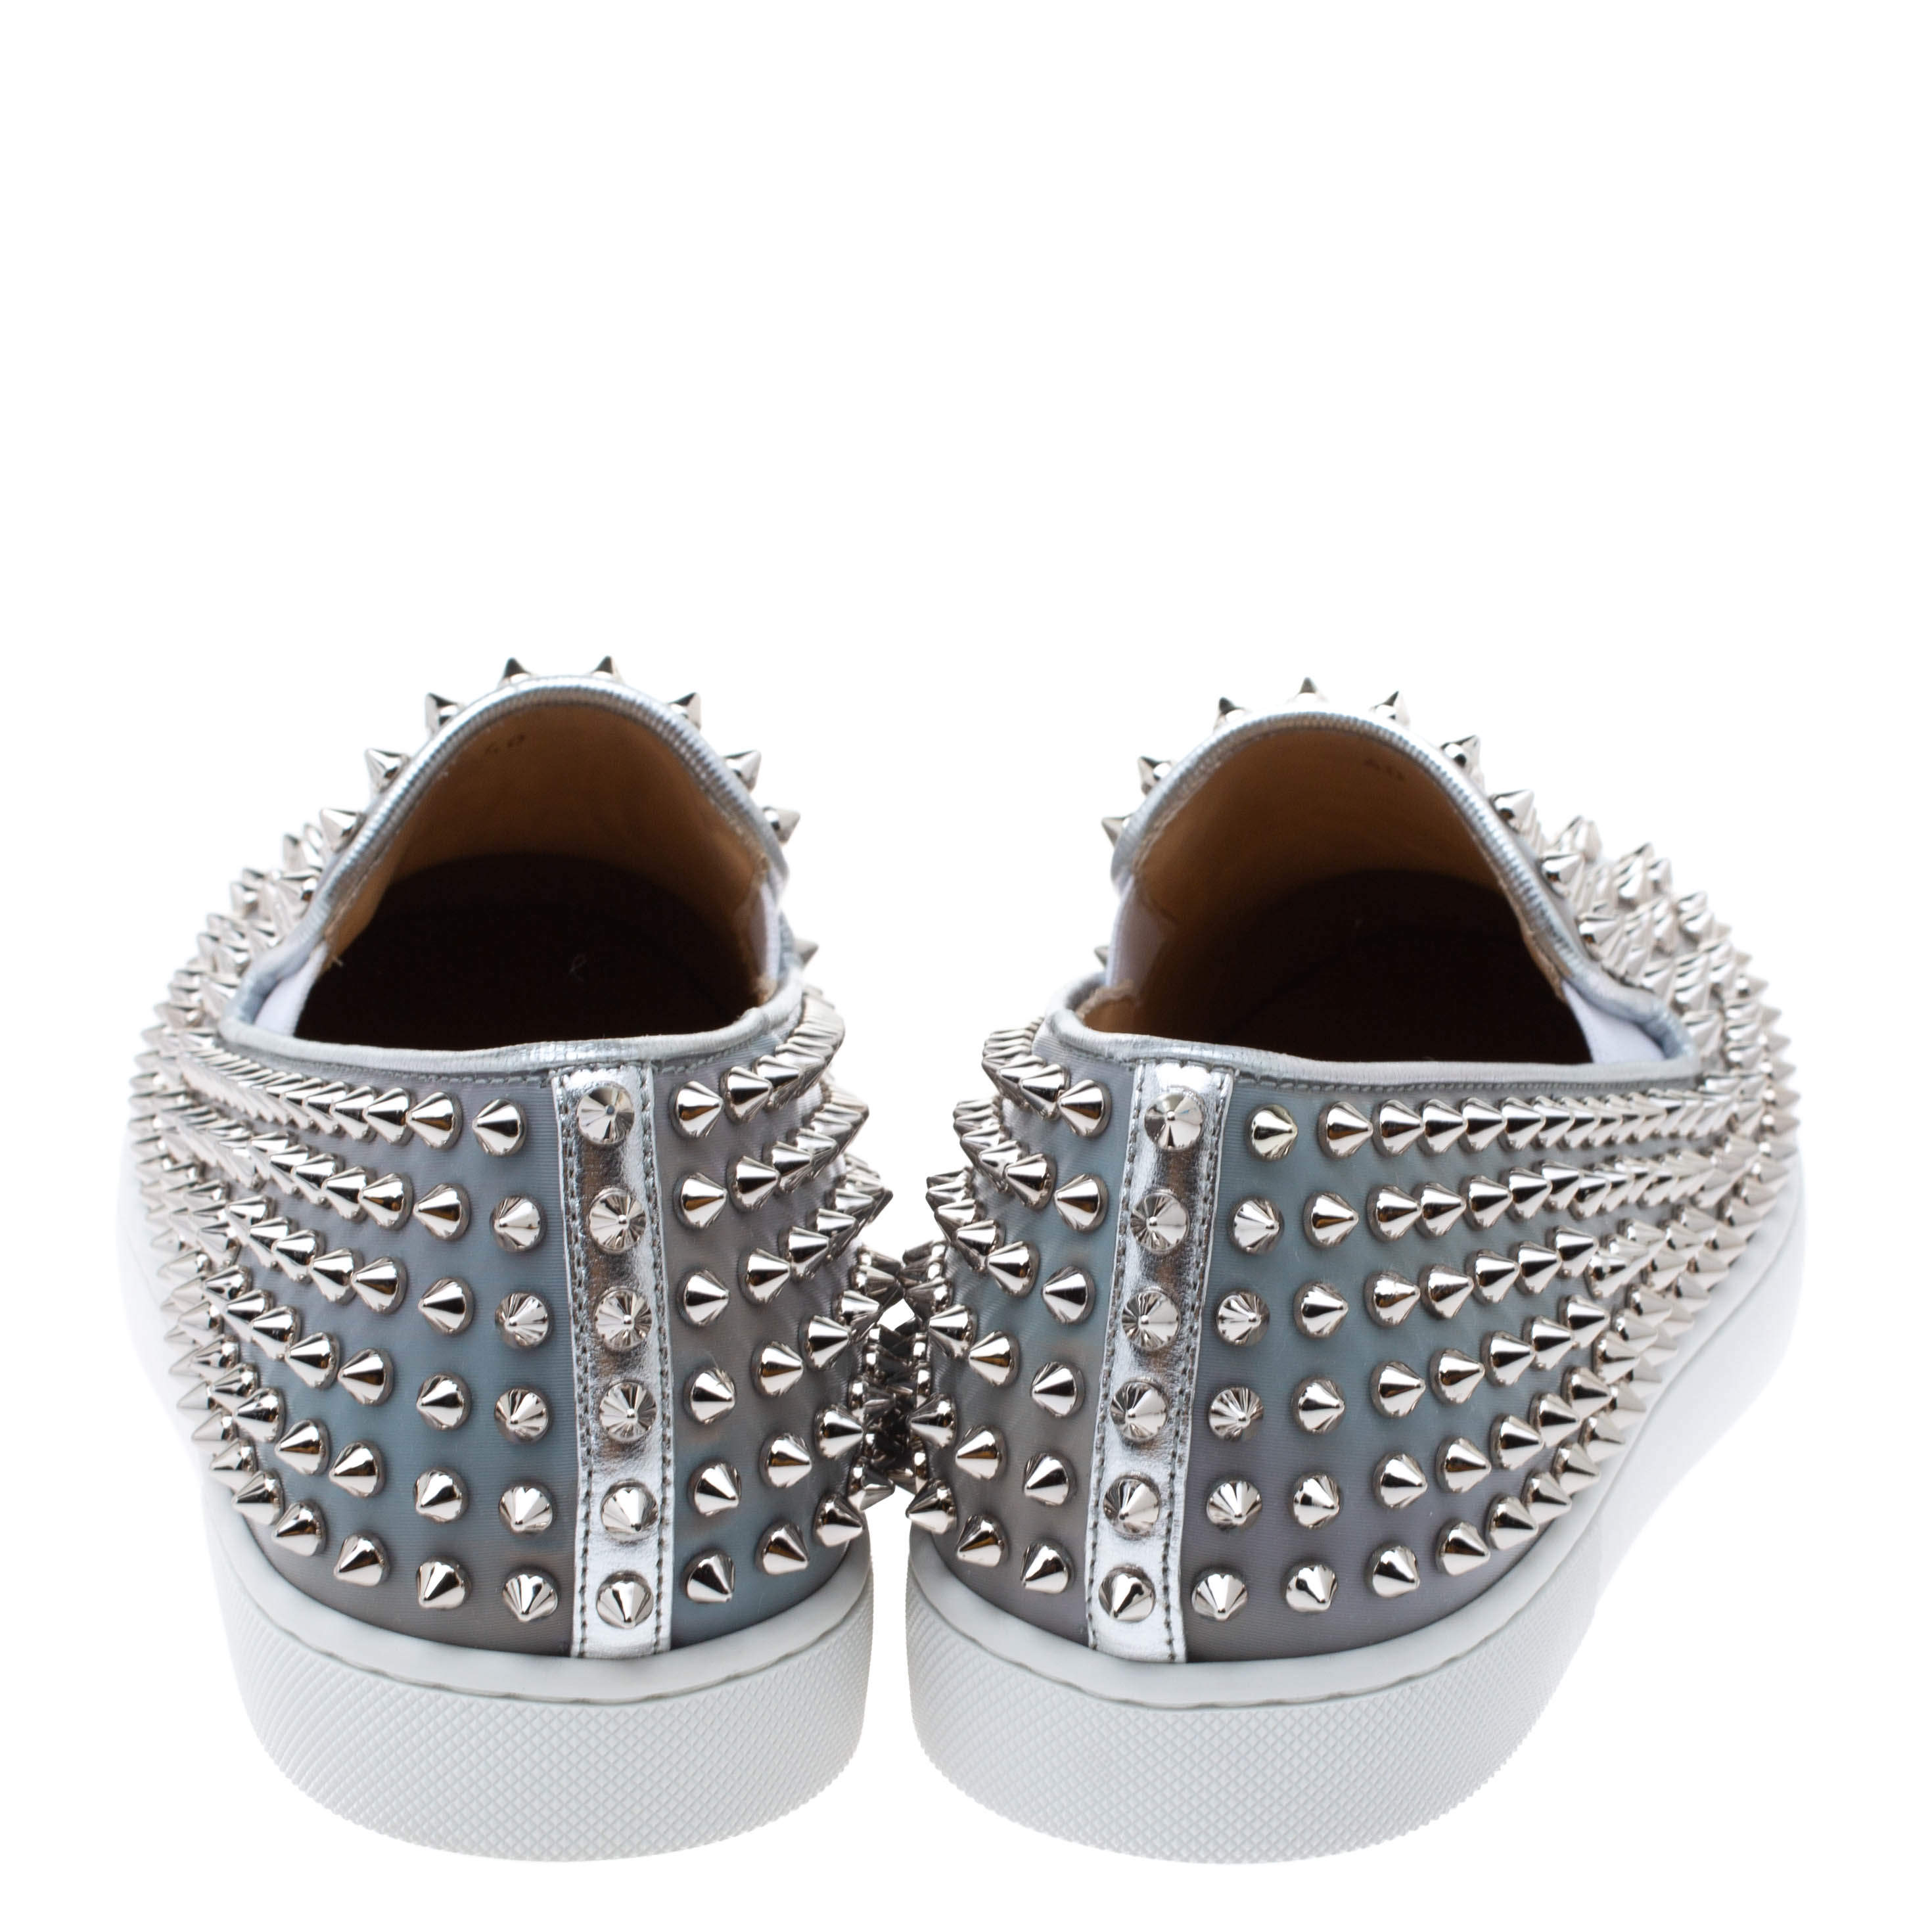 Shop Christian Louboutin ROLLER BOAT 2020 Cruise Studded Plain Leather  Shoes (1200744B139) by mariposaz